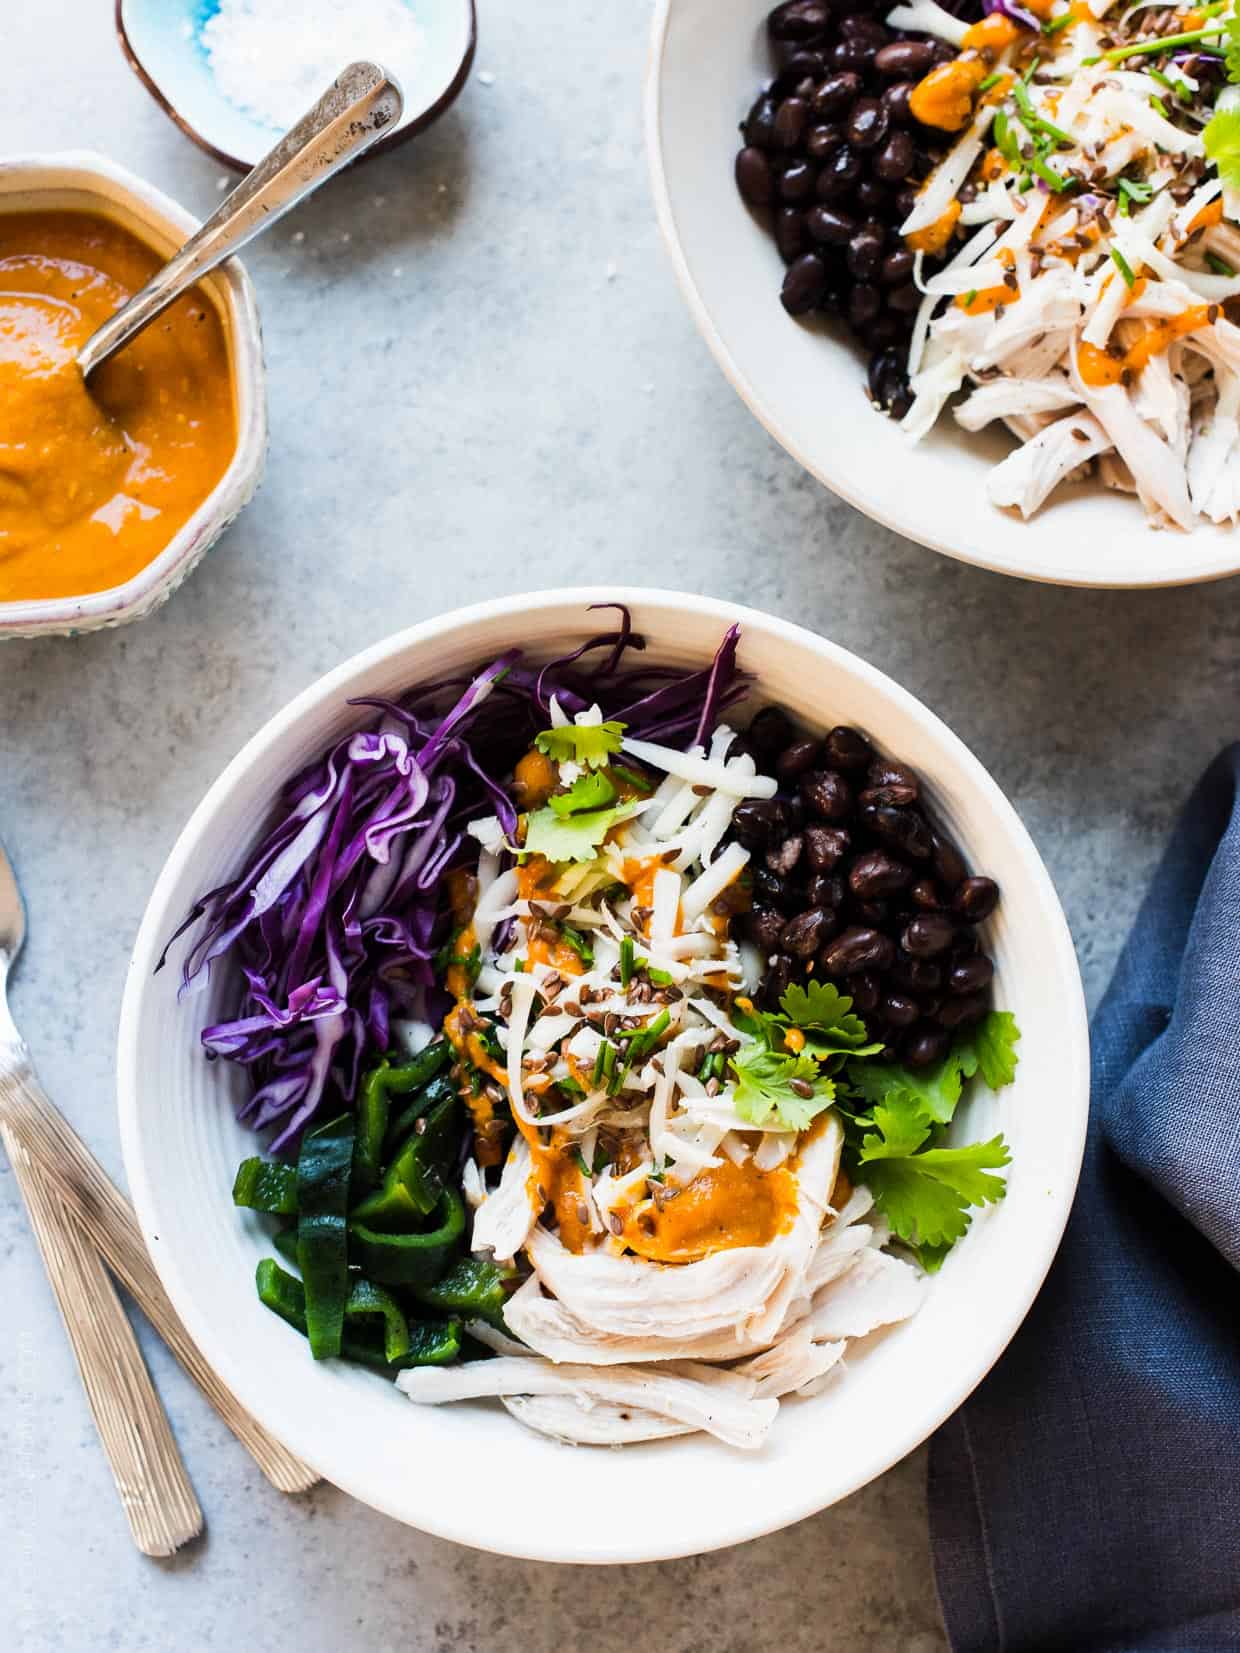  A fresh salad prepared with shredded chicken, cabbage, black beans, charred poblanos, and pumpkin-red curry vinaigrette served in a white bowl.